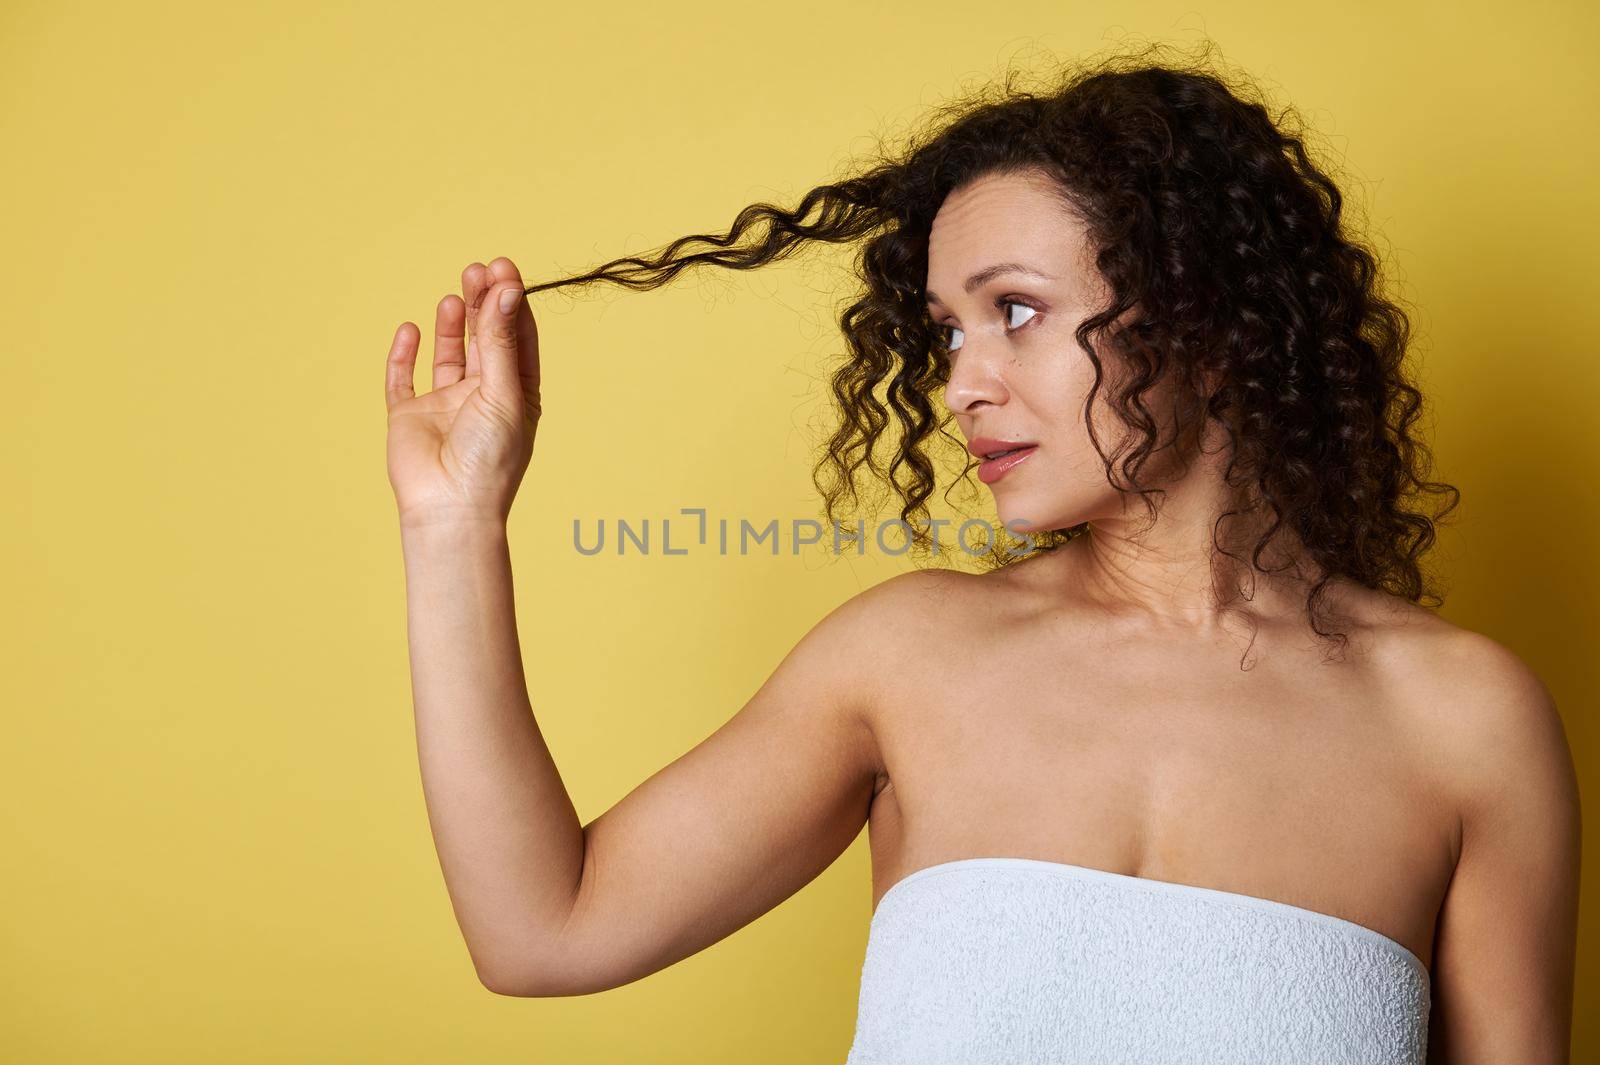 Young woman, wrapped in a bath towel, holding a lock of her curly hair and looking at her, posing against a yellow background with copy space